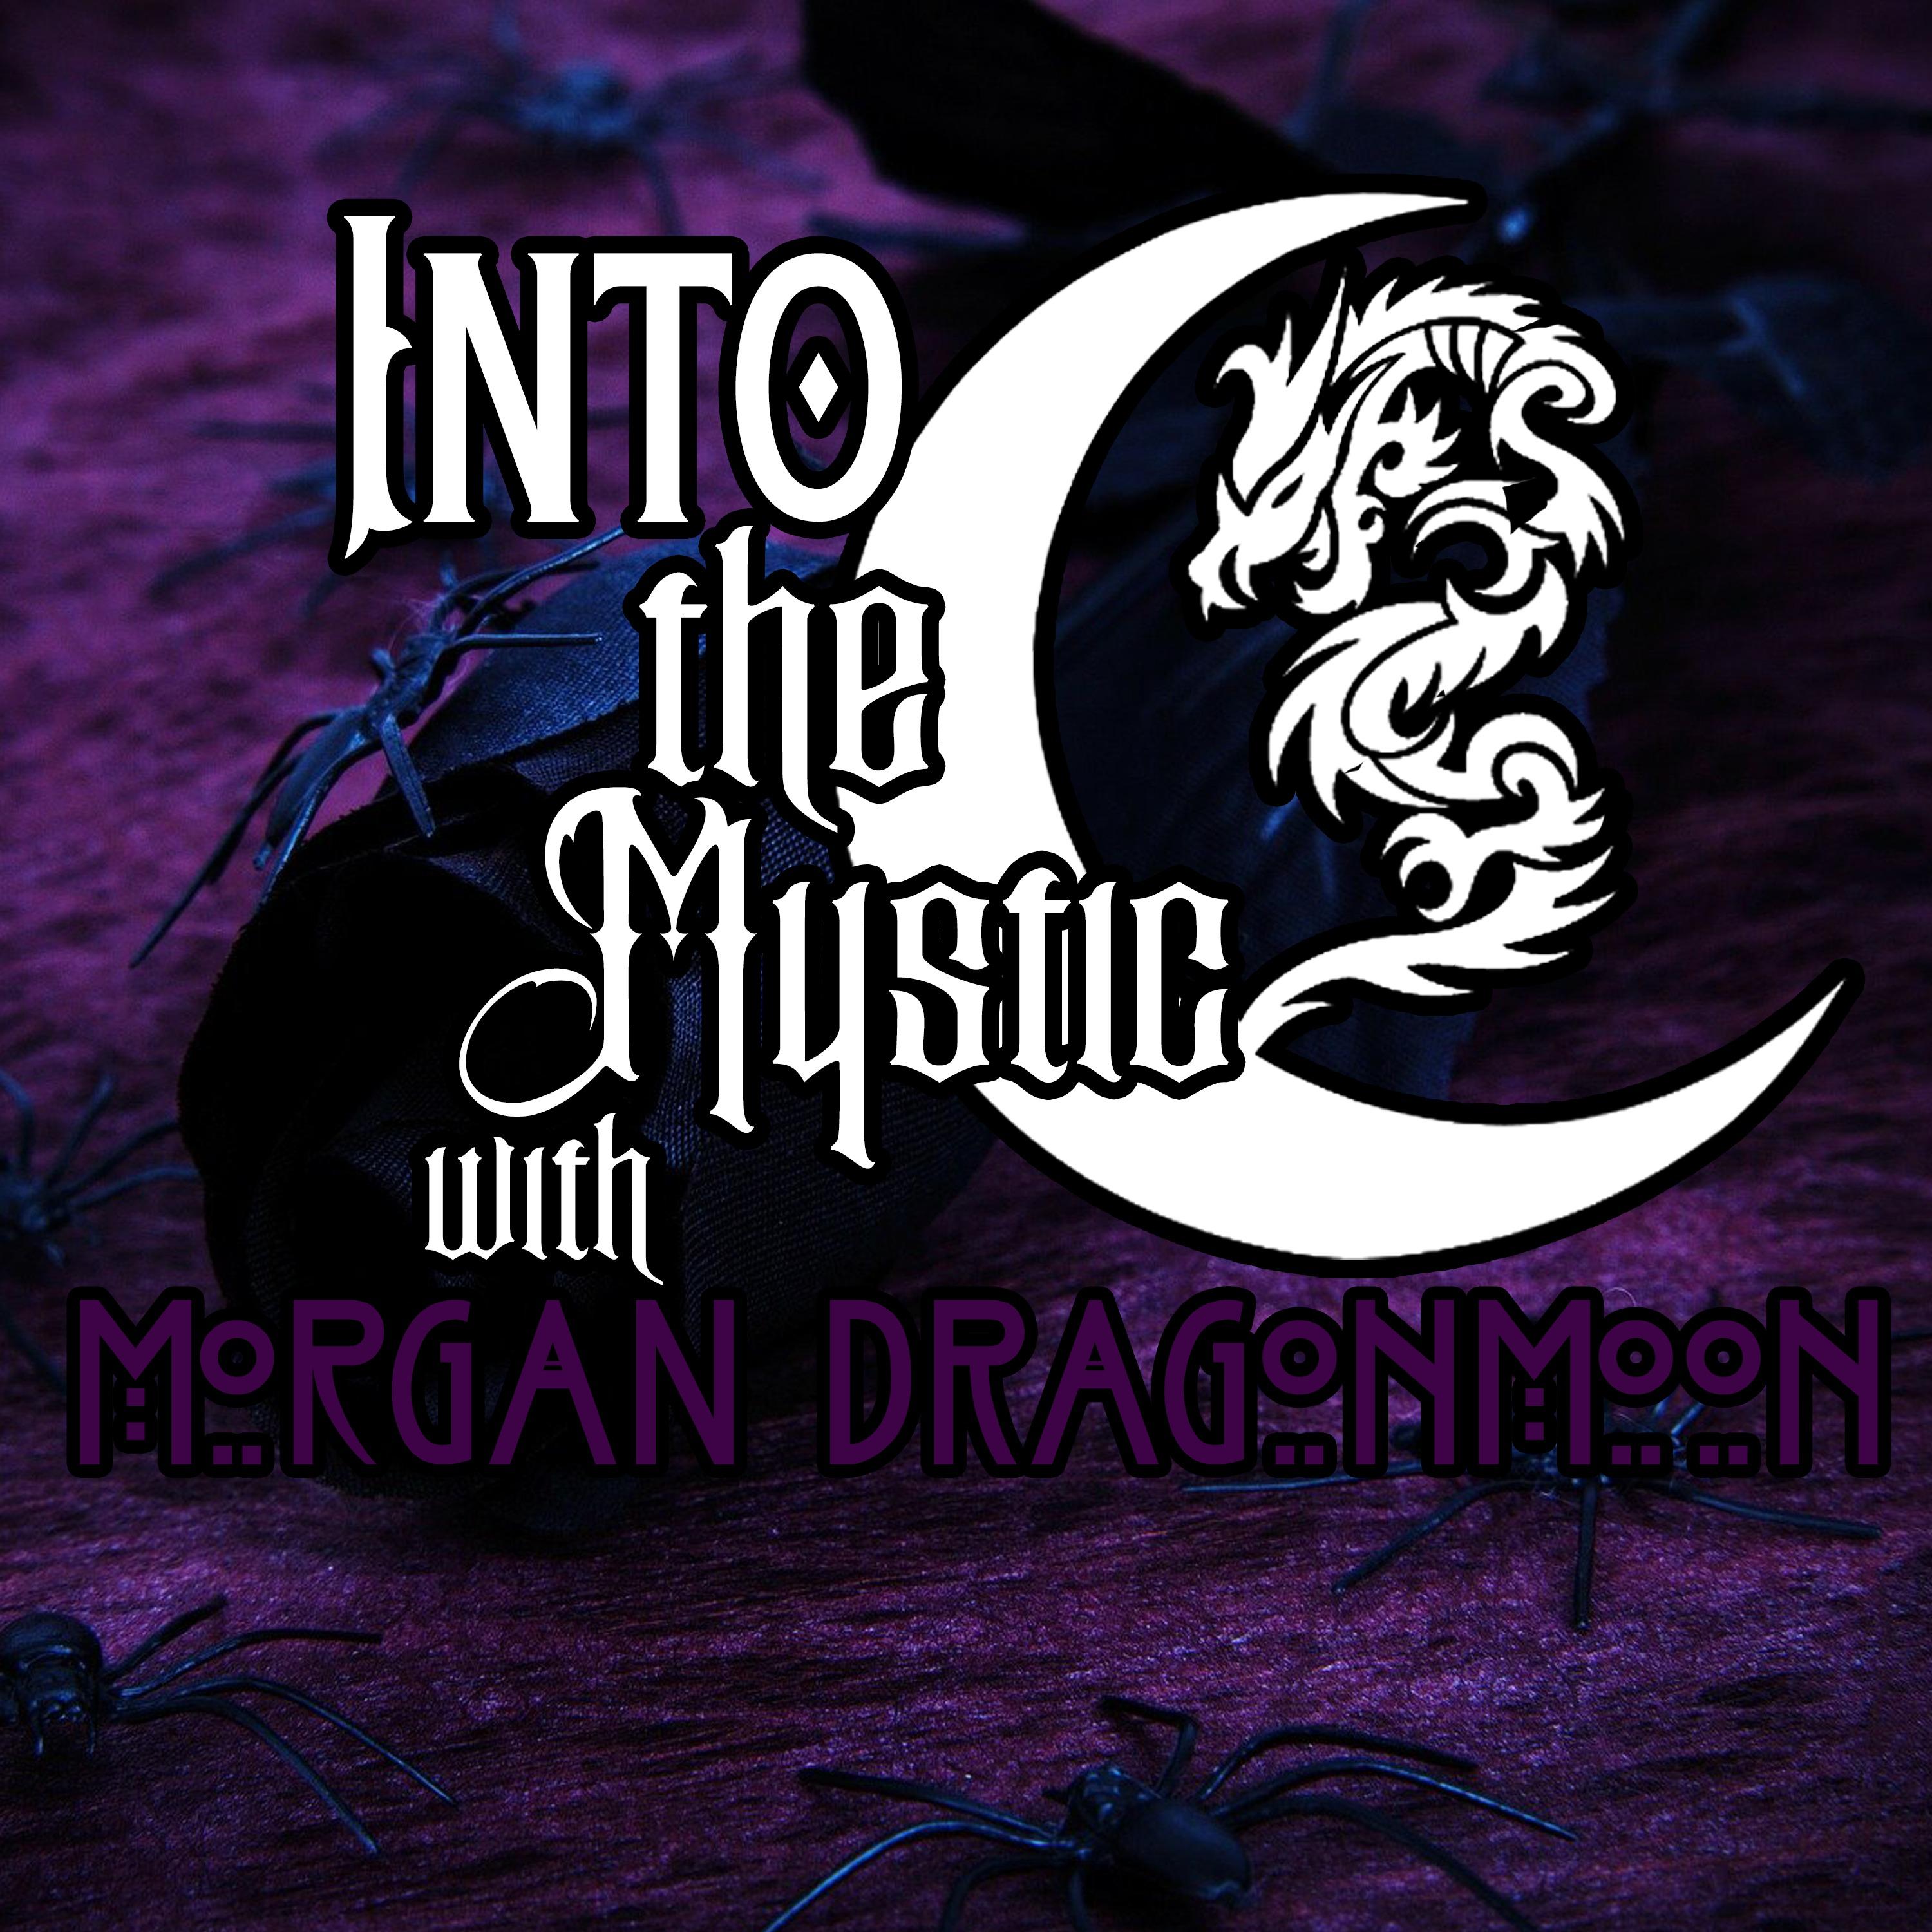 Into the Mystic with Morgan Dragonmoon